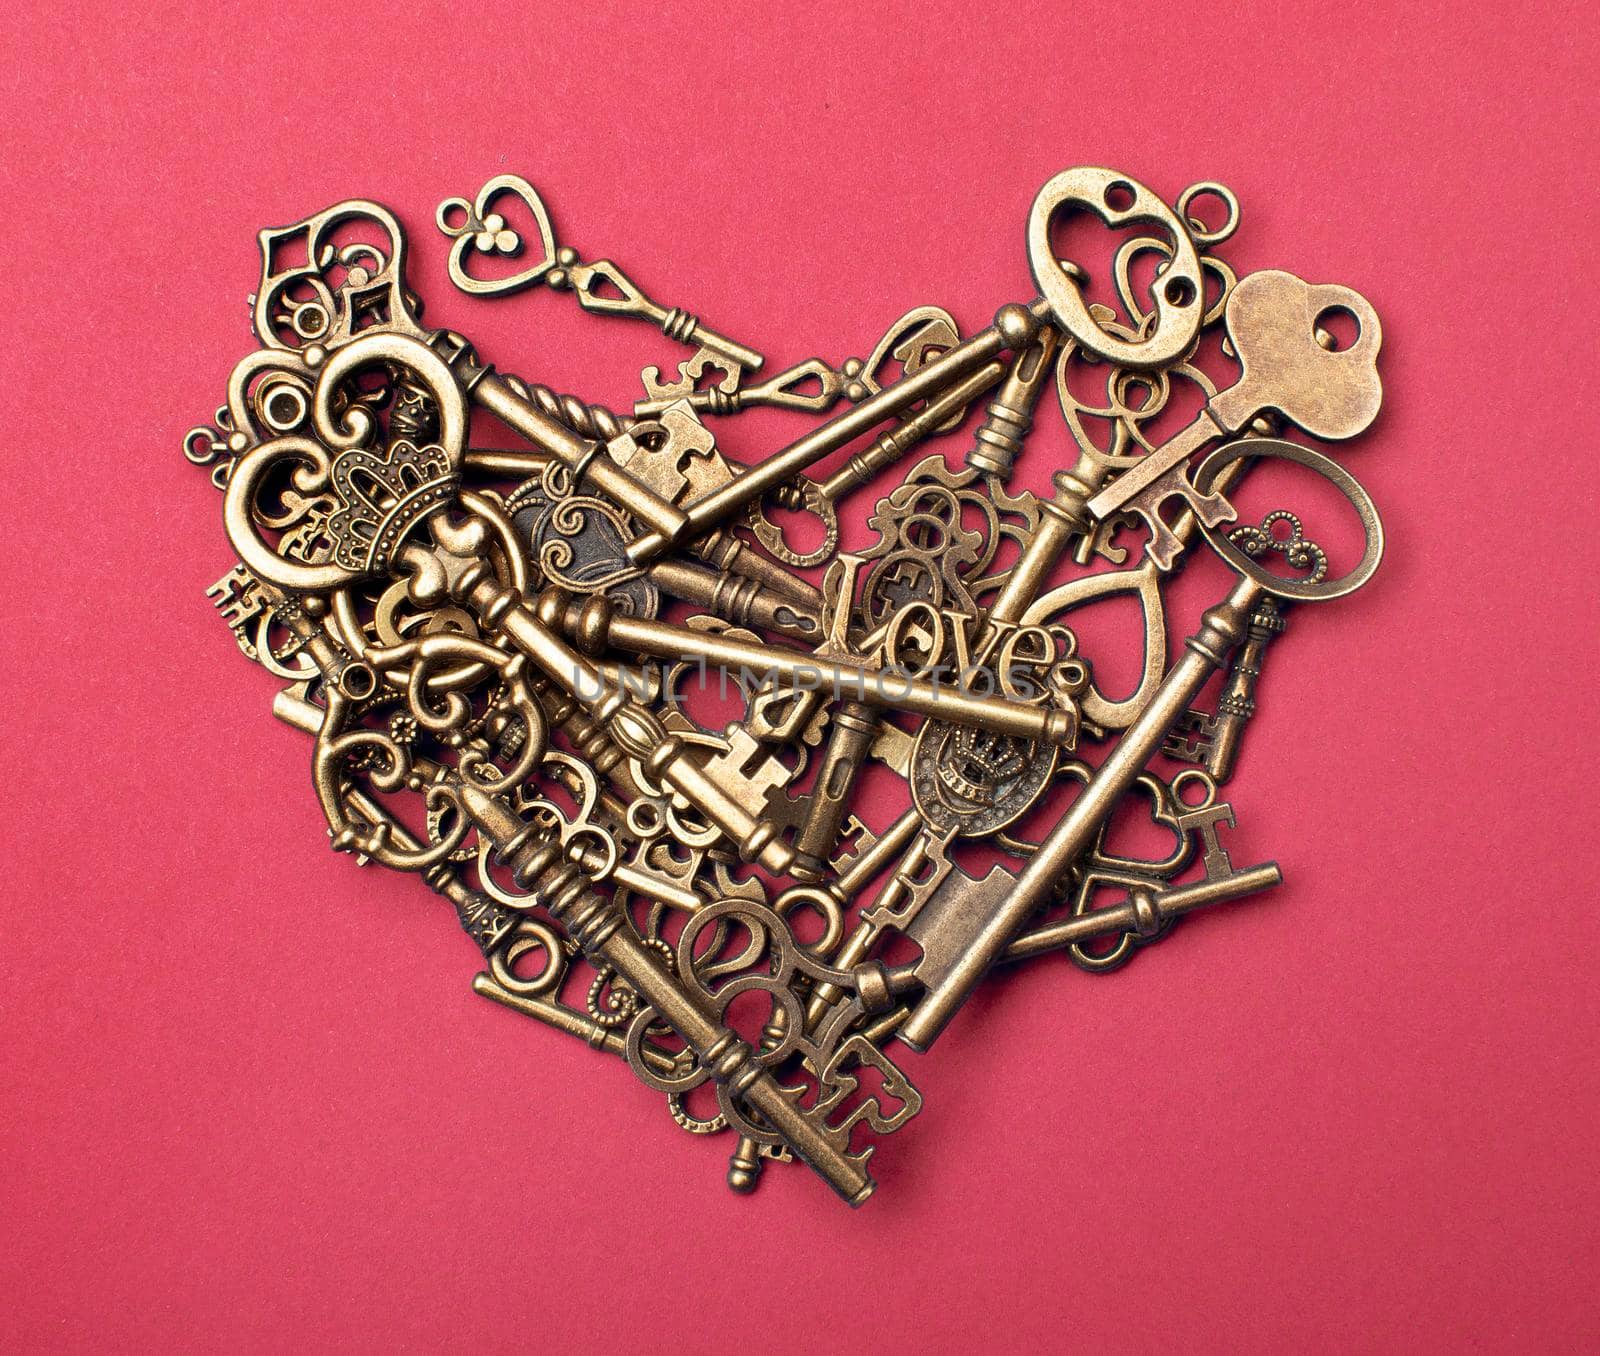 Old, vintage keys in the shape of a heart isolated on pink color bacground